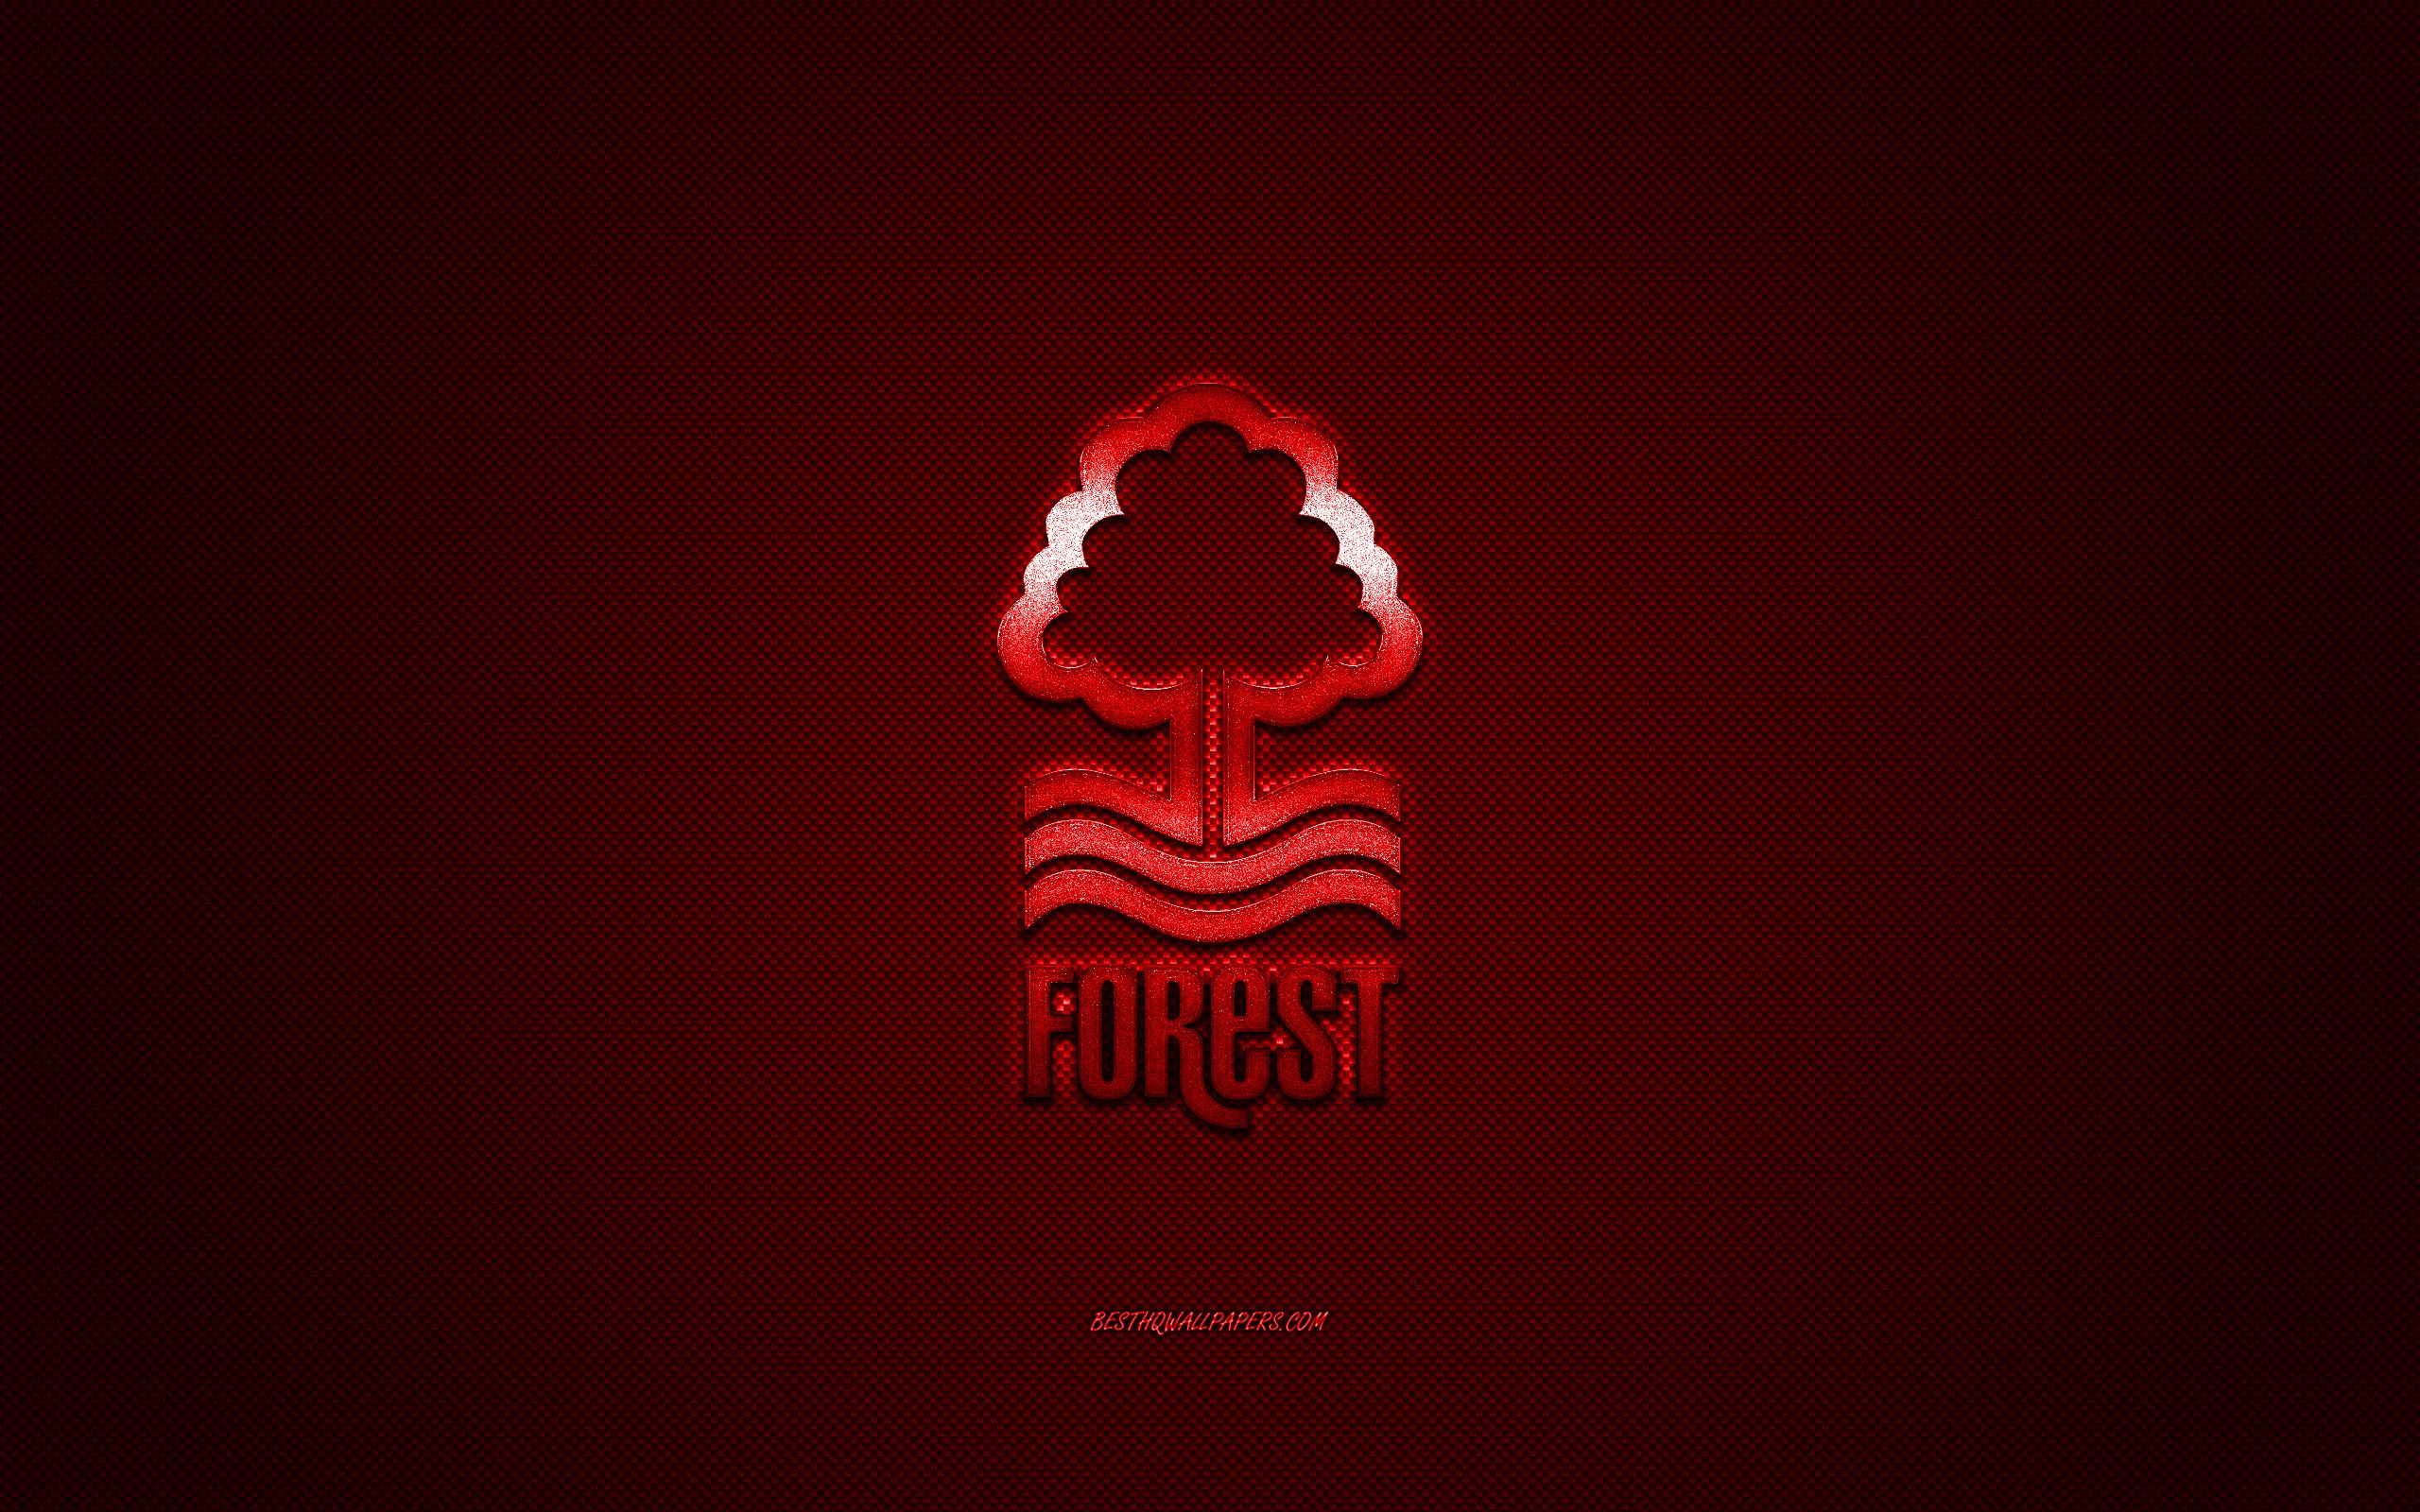 Download wallpaper Nottingham Forest FC, English football club, EFL Championship, red logo, red carbon fiber background, football, Nottingham, Nottingham Forest FC logo for desktop with resolution 2560x1600. High Quality HD picture wallpaper